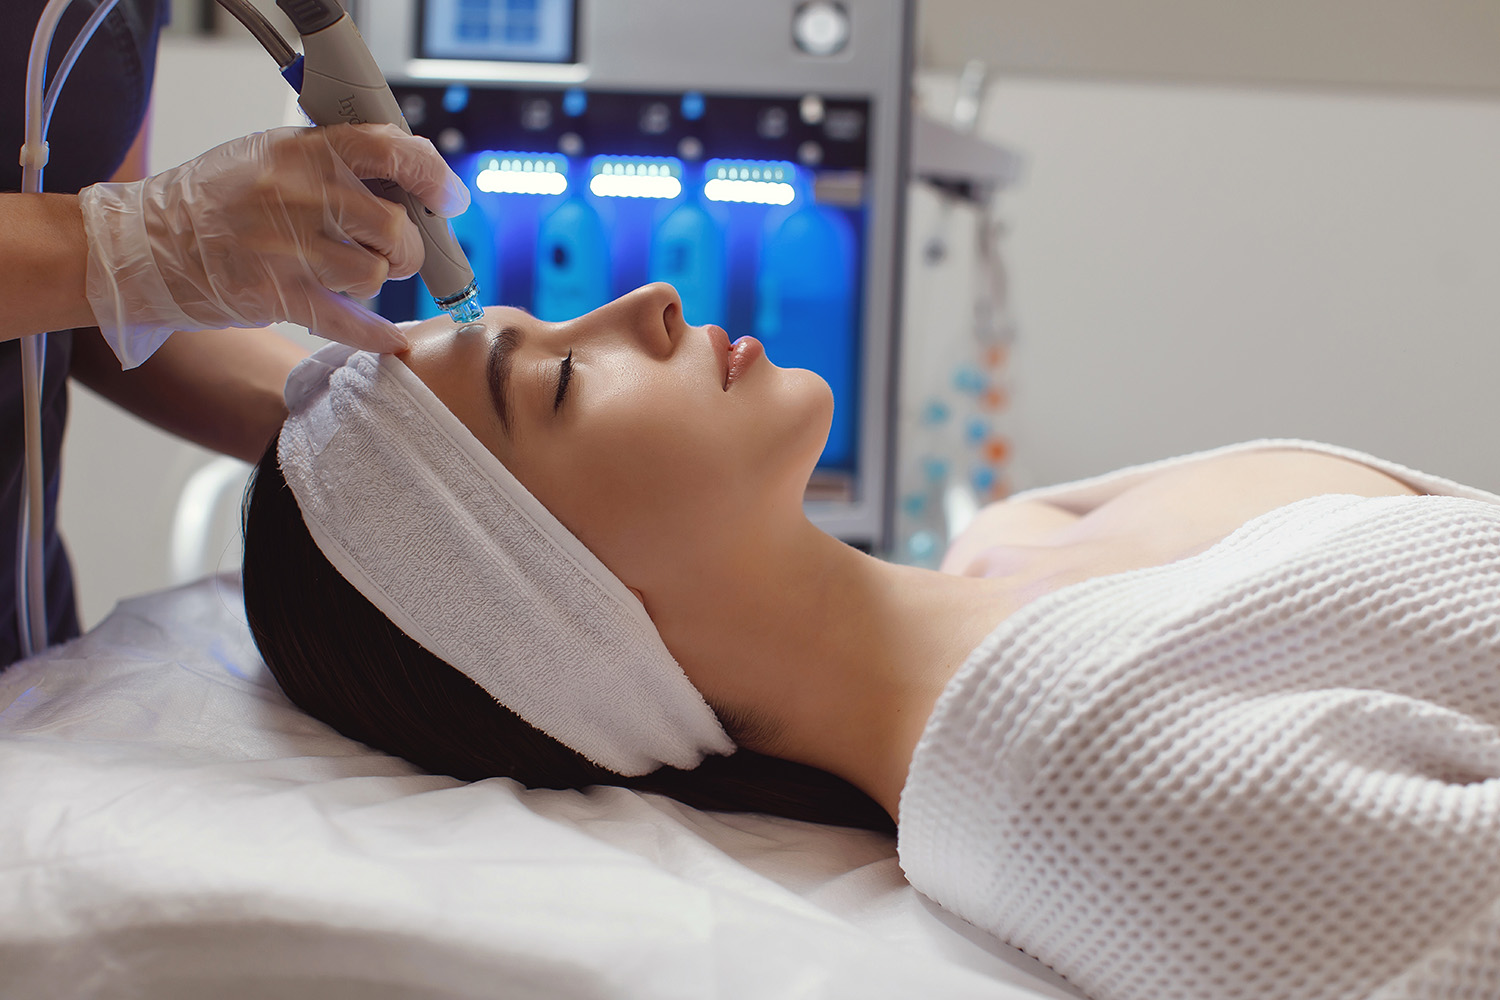 Side view of woman receiving microdermabrasion therapy on forehead